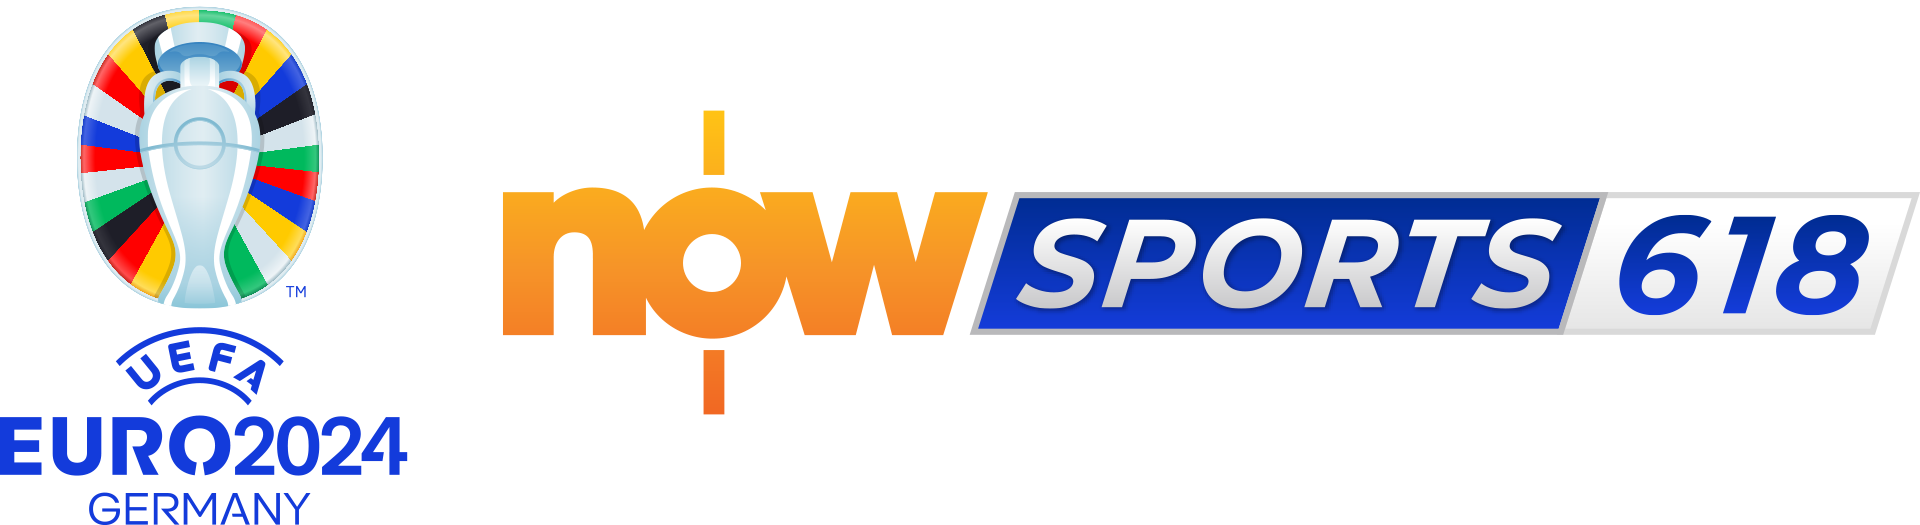 Now Sports 618